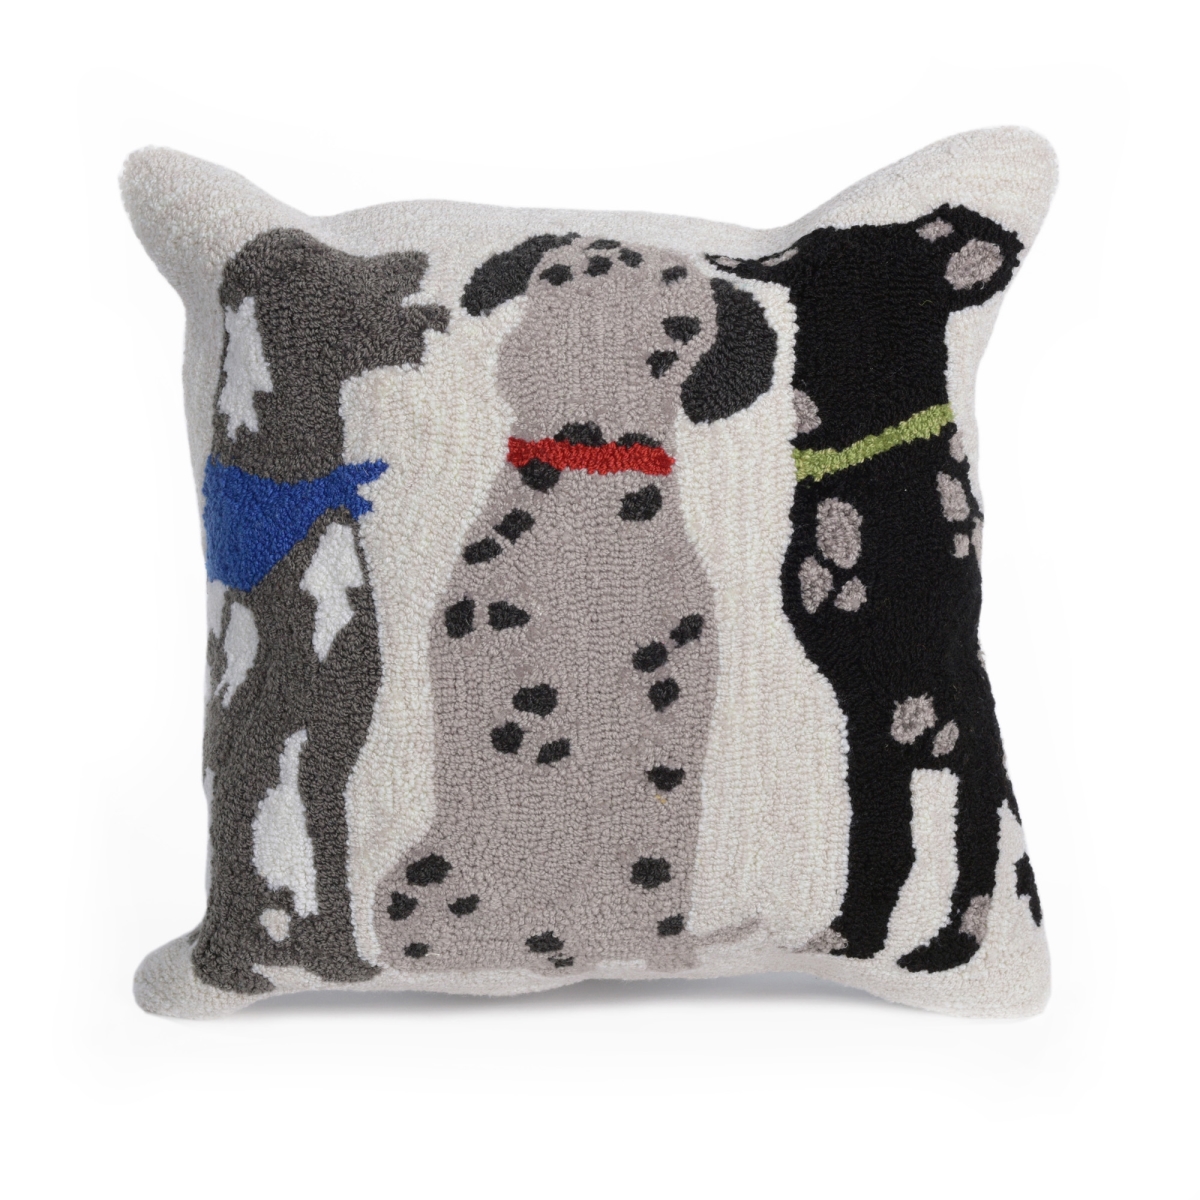 Trans-ocean Imports 7fp8s426744 18 In. Square Liora Manne Frontporch Three Dogs Indoor & Outdoor Hand Tufted Pillow - Multicolor